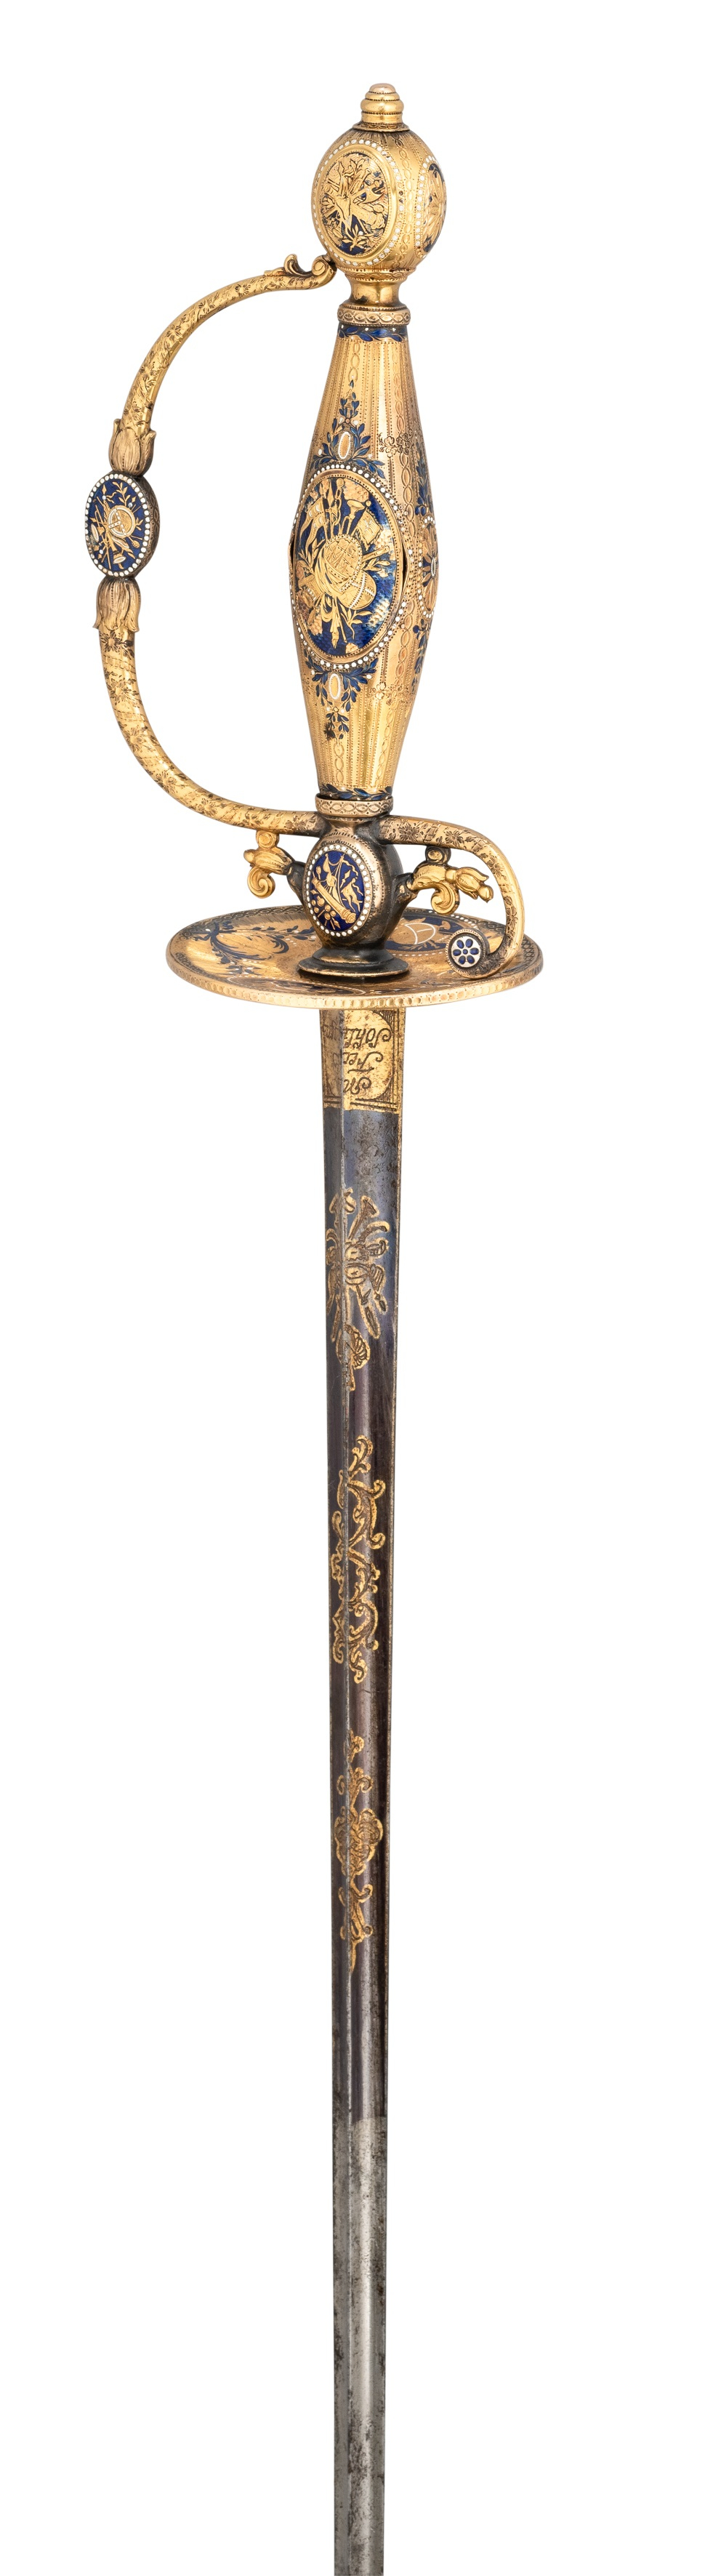 A FINE FRENCH SMALLSWORD WITH ENAMELLED AND GOLD CLOSE-PLATED SILVER HILT, LATE 18TH CENTURY,